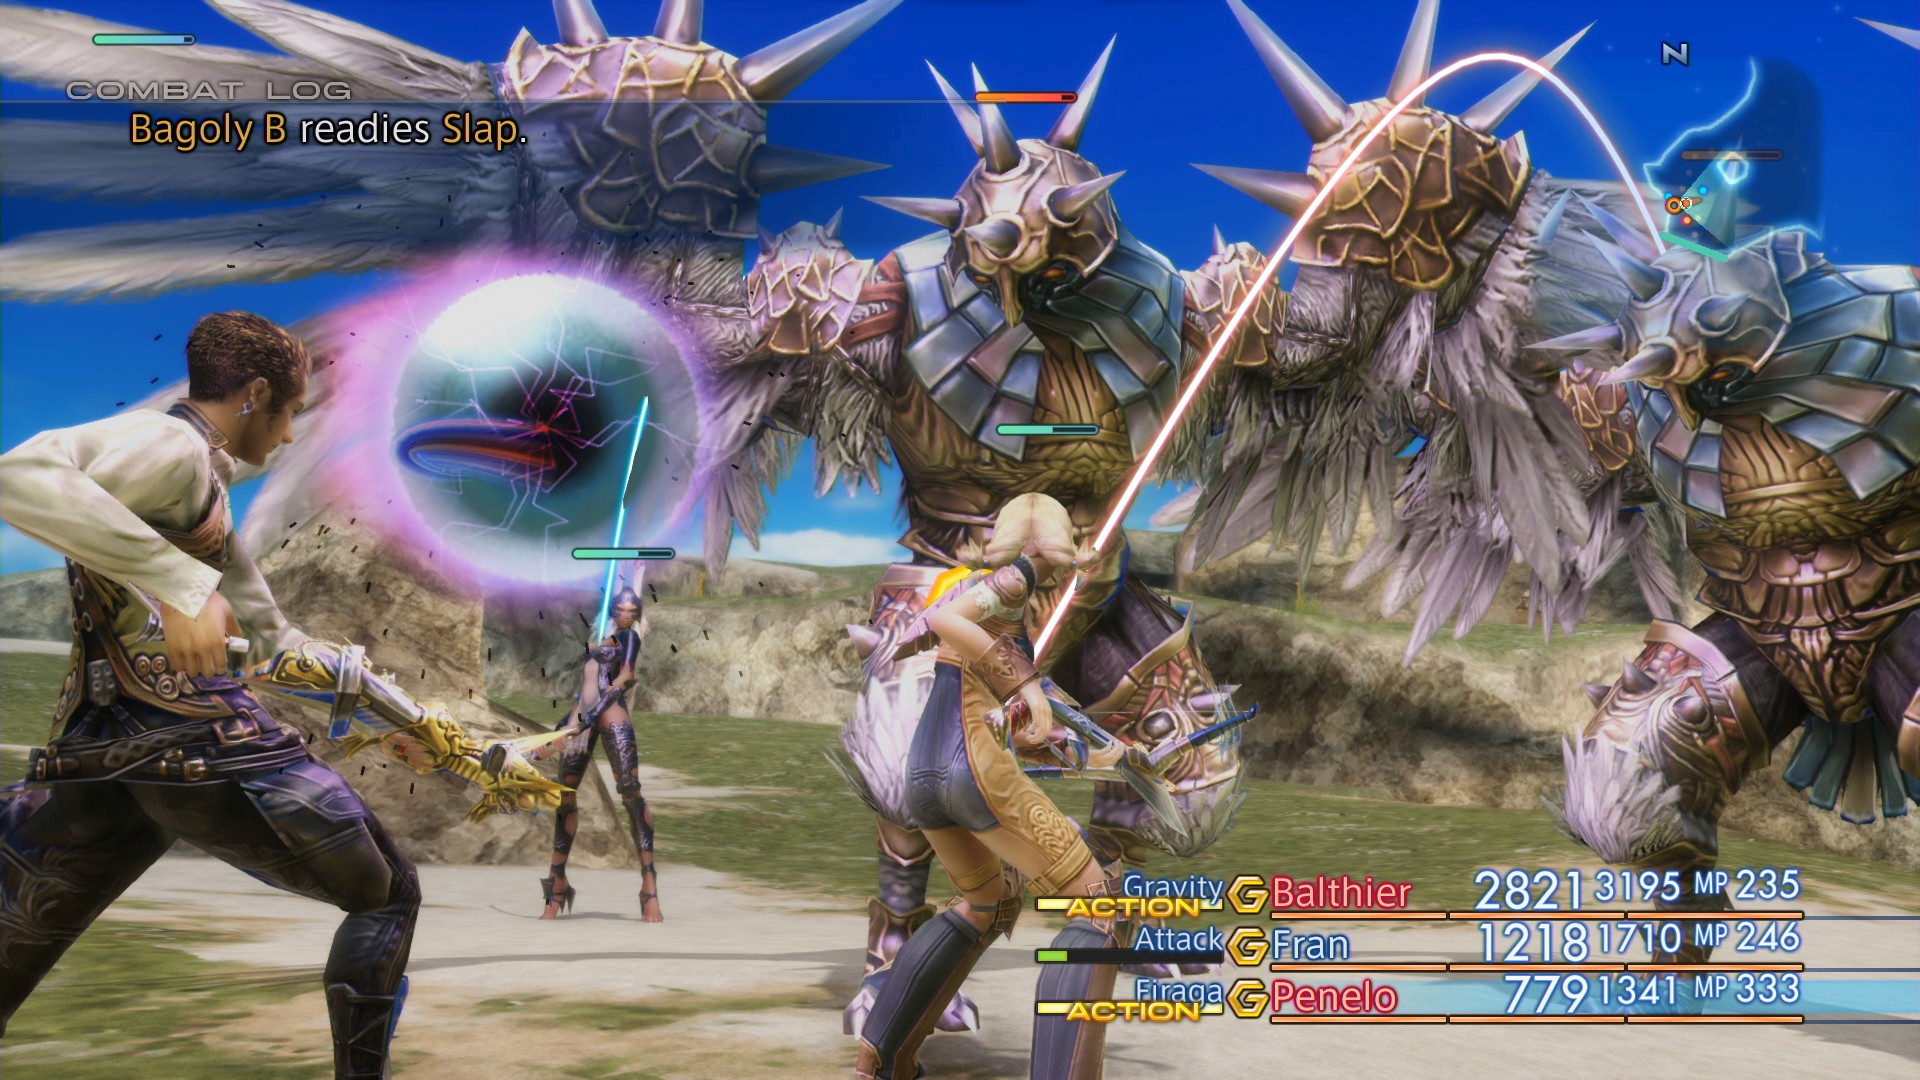 Final Fantasy XII The Zodiac Age Arrives Today on Xbox One.